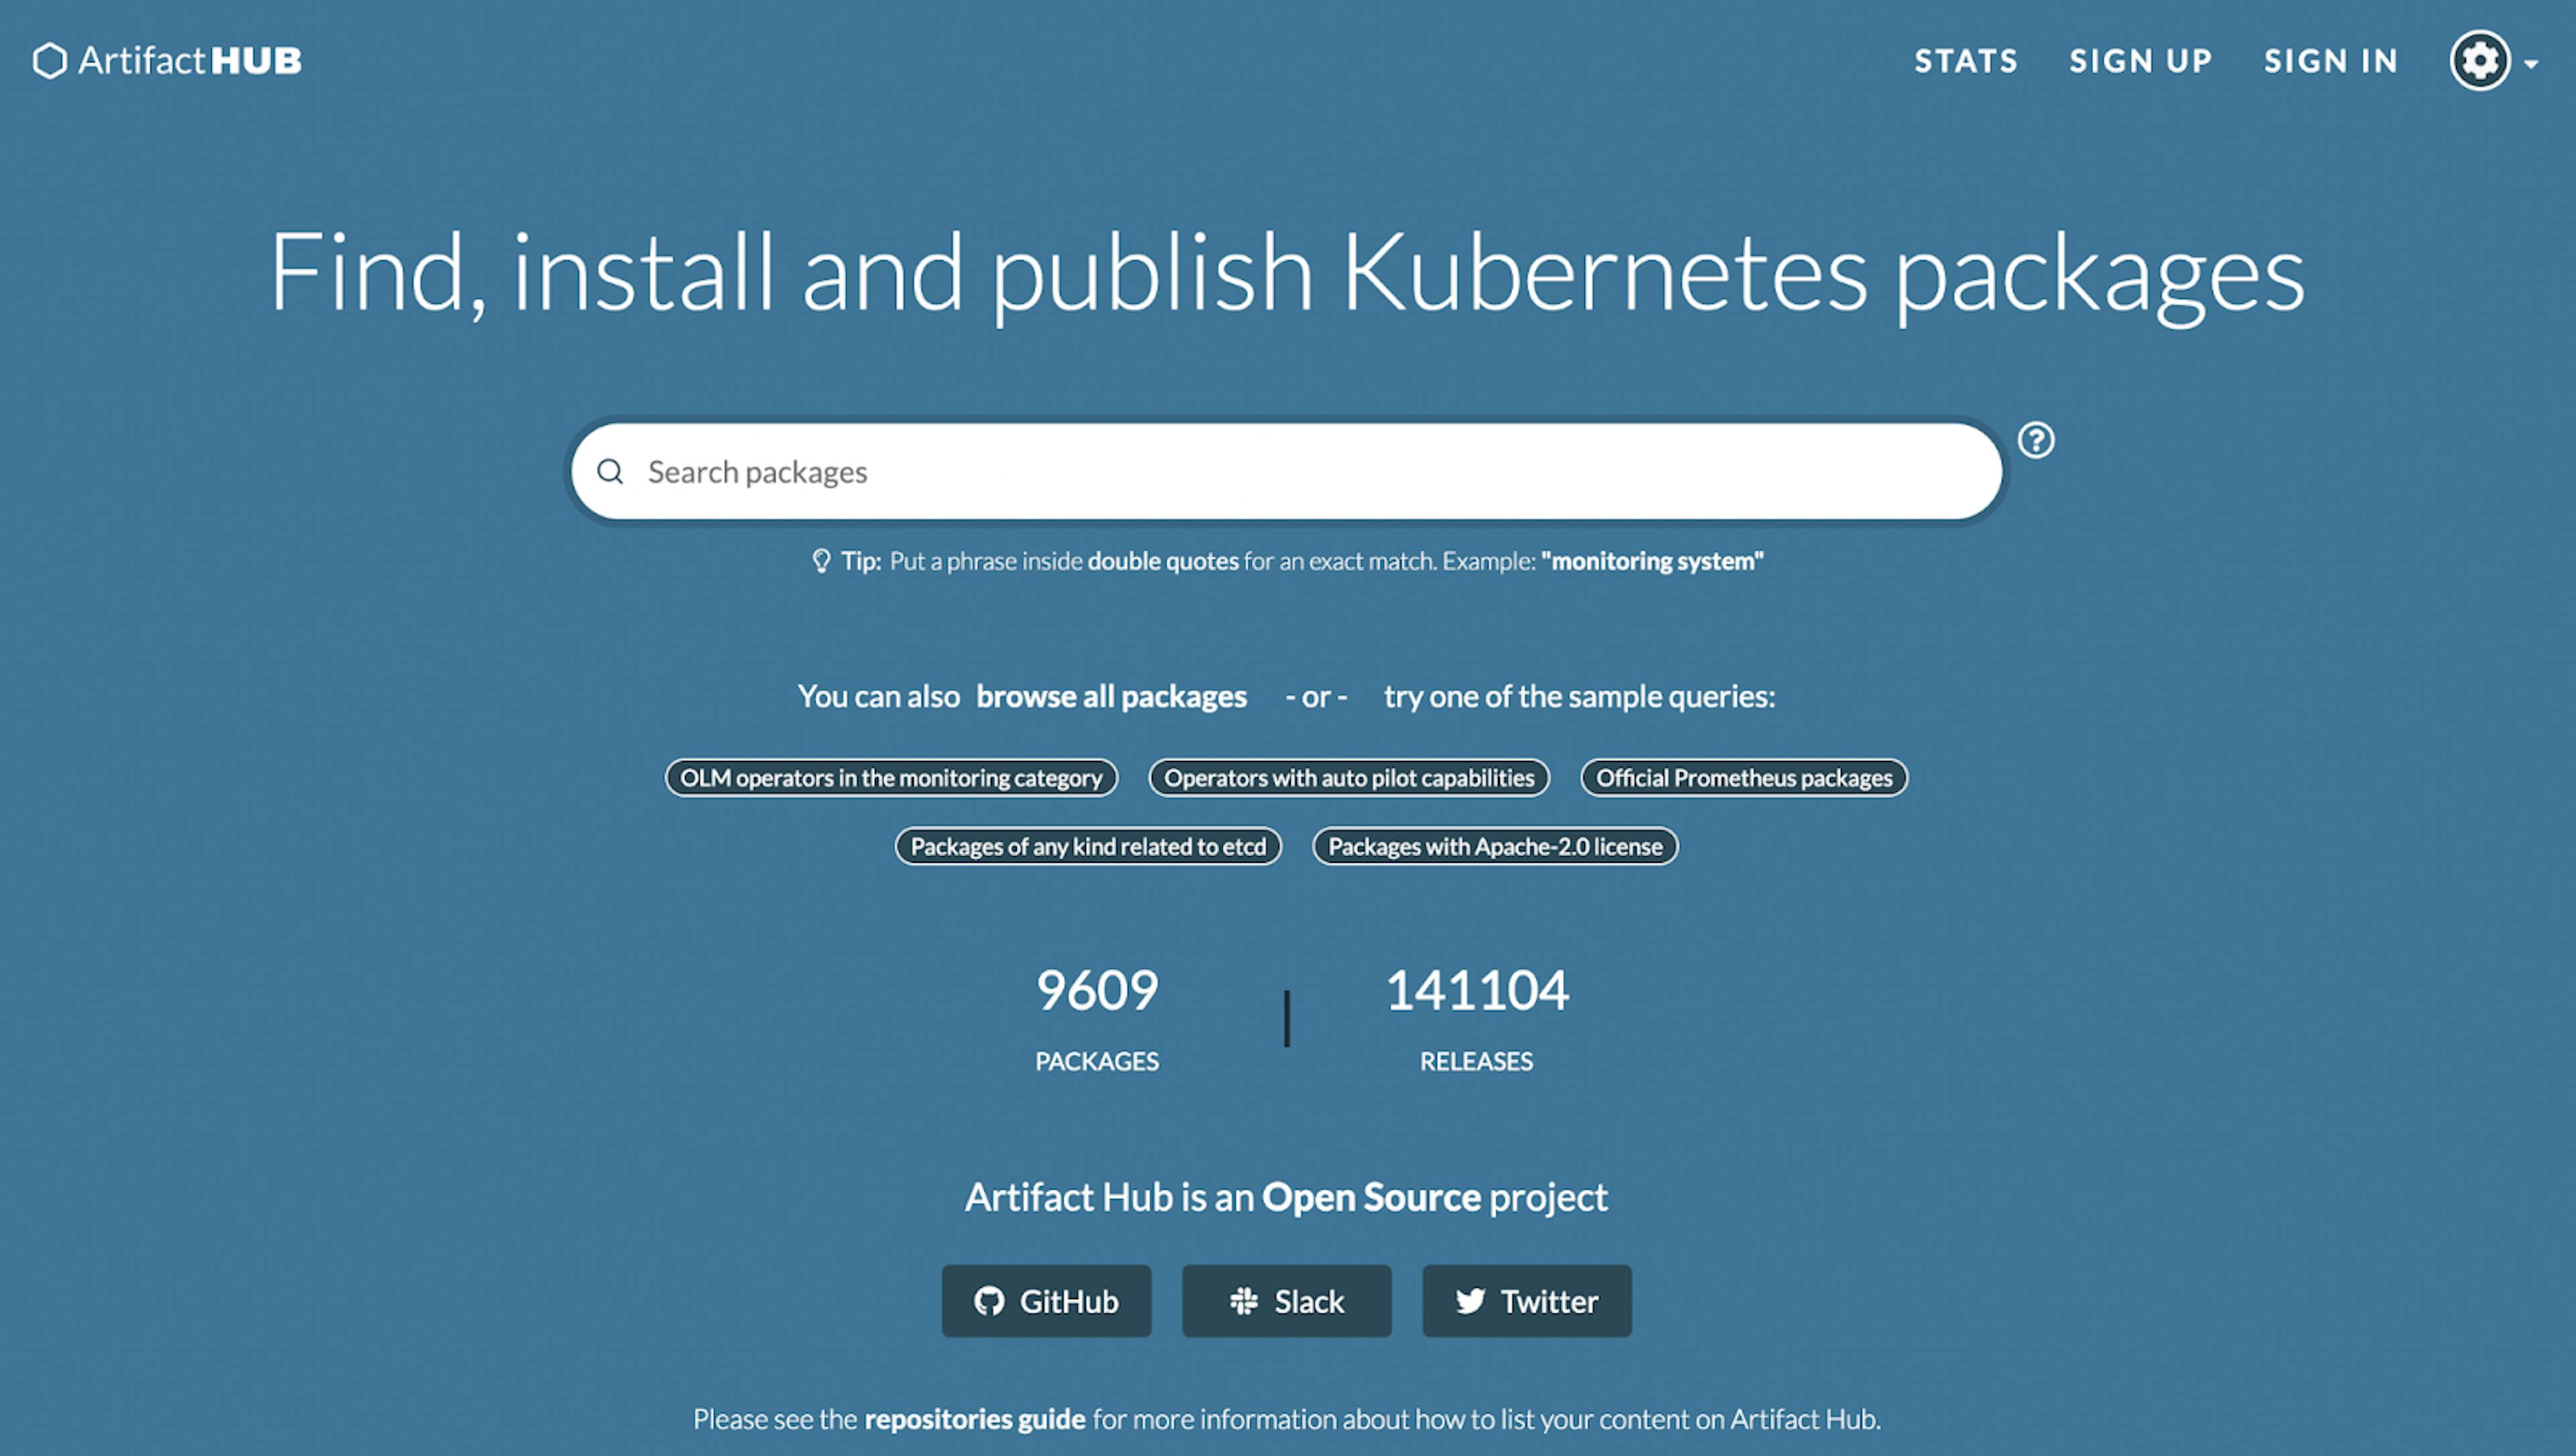 A screenshot of ArtifactHub to publish Kubernetes packages